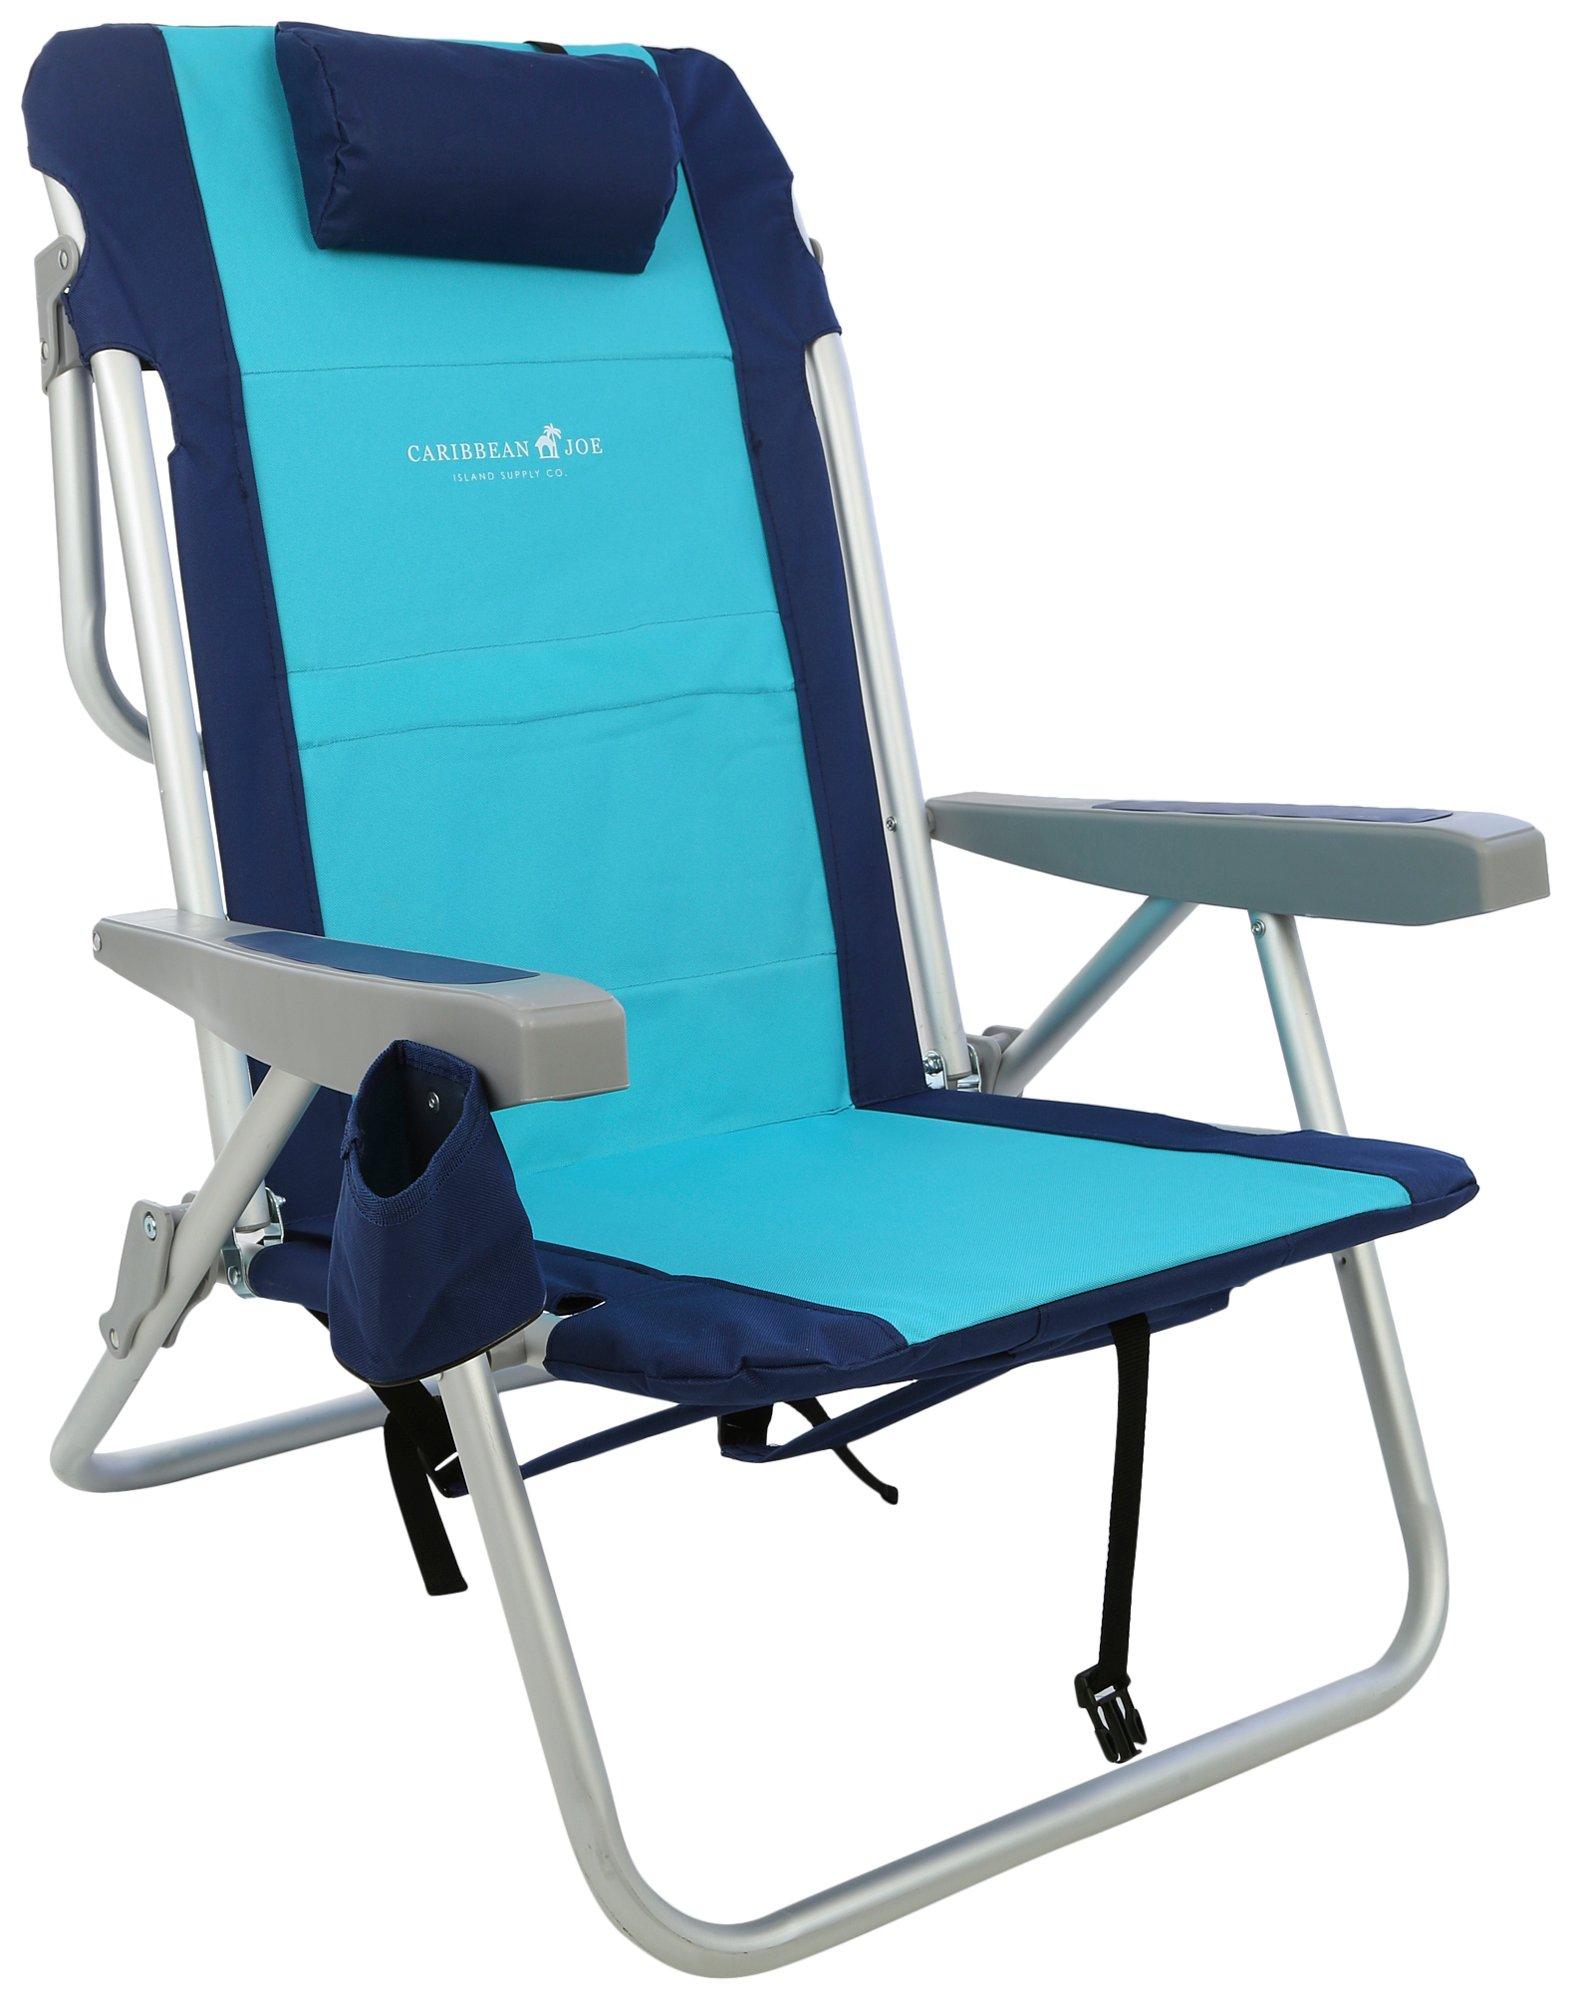 Deluxe Cooler Back Pack Chair